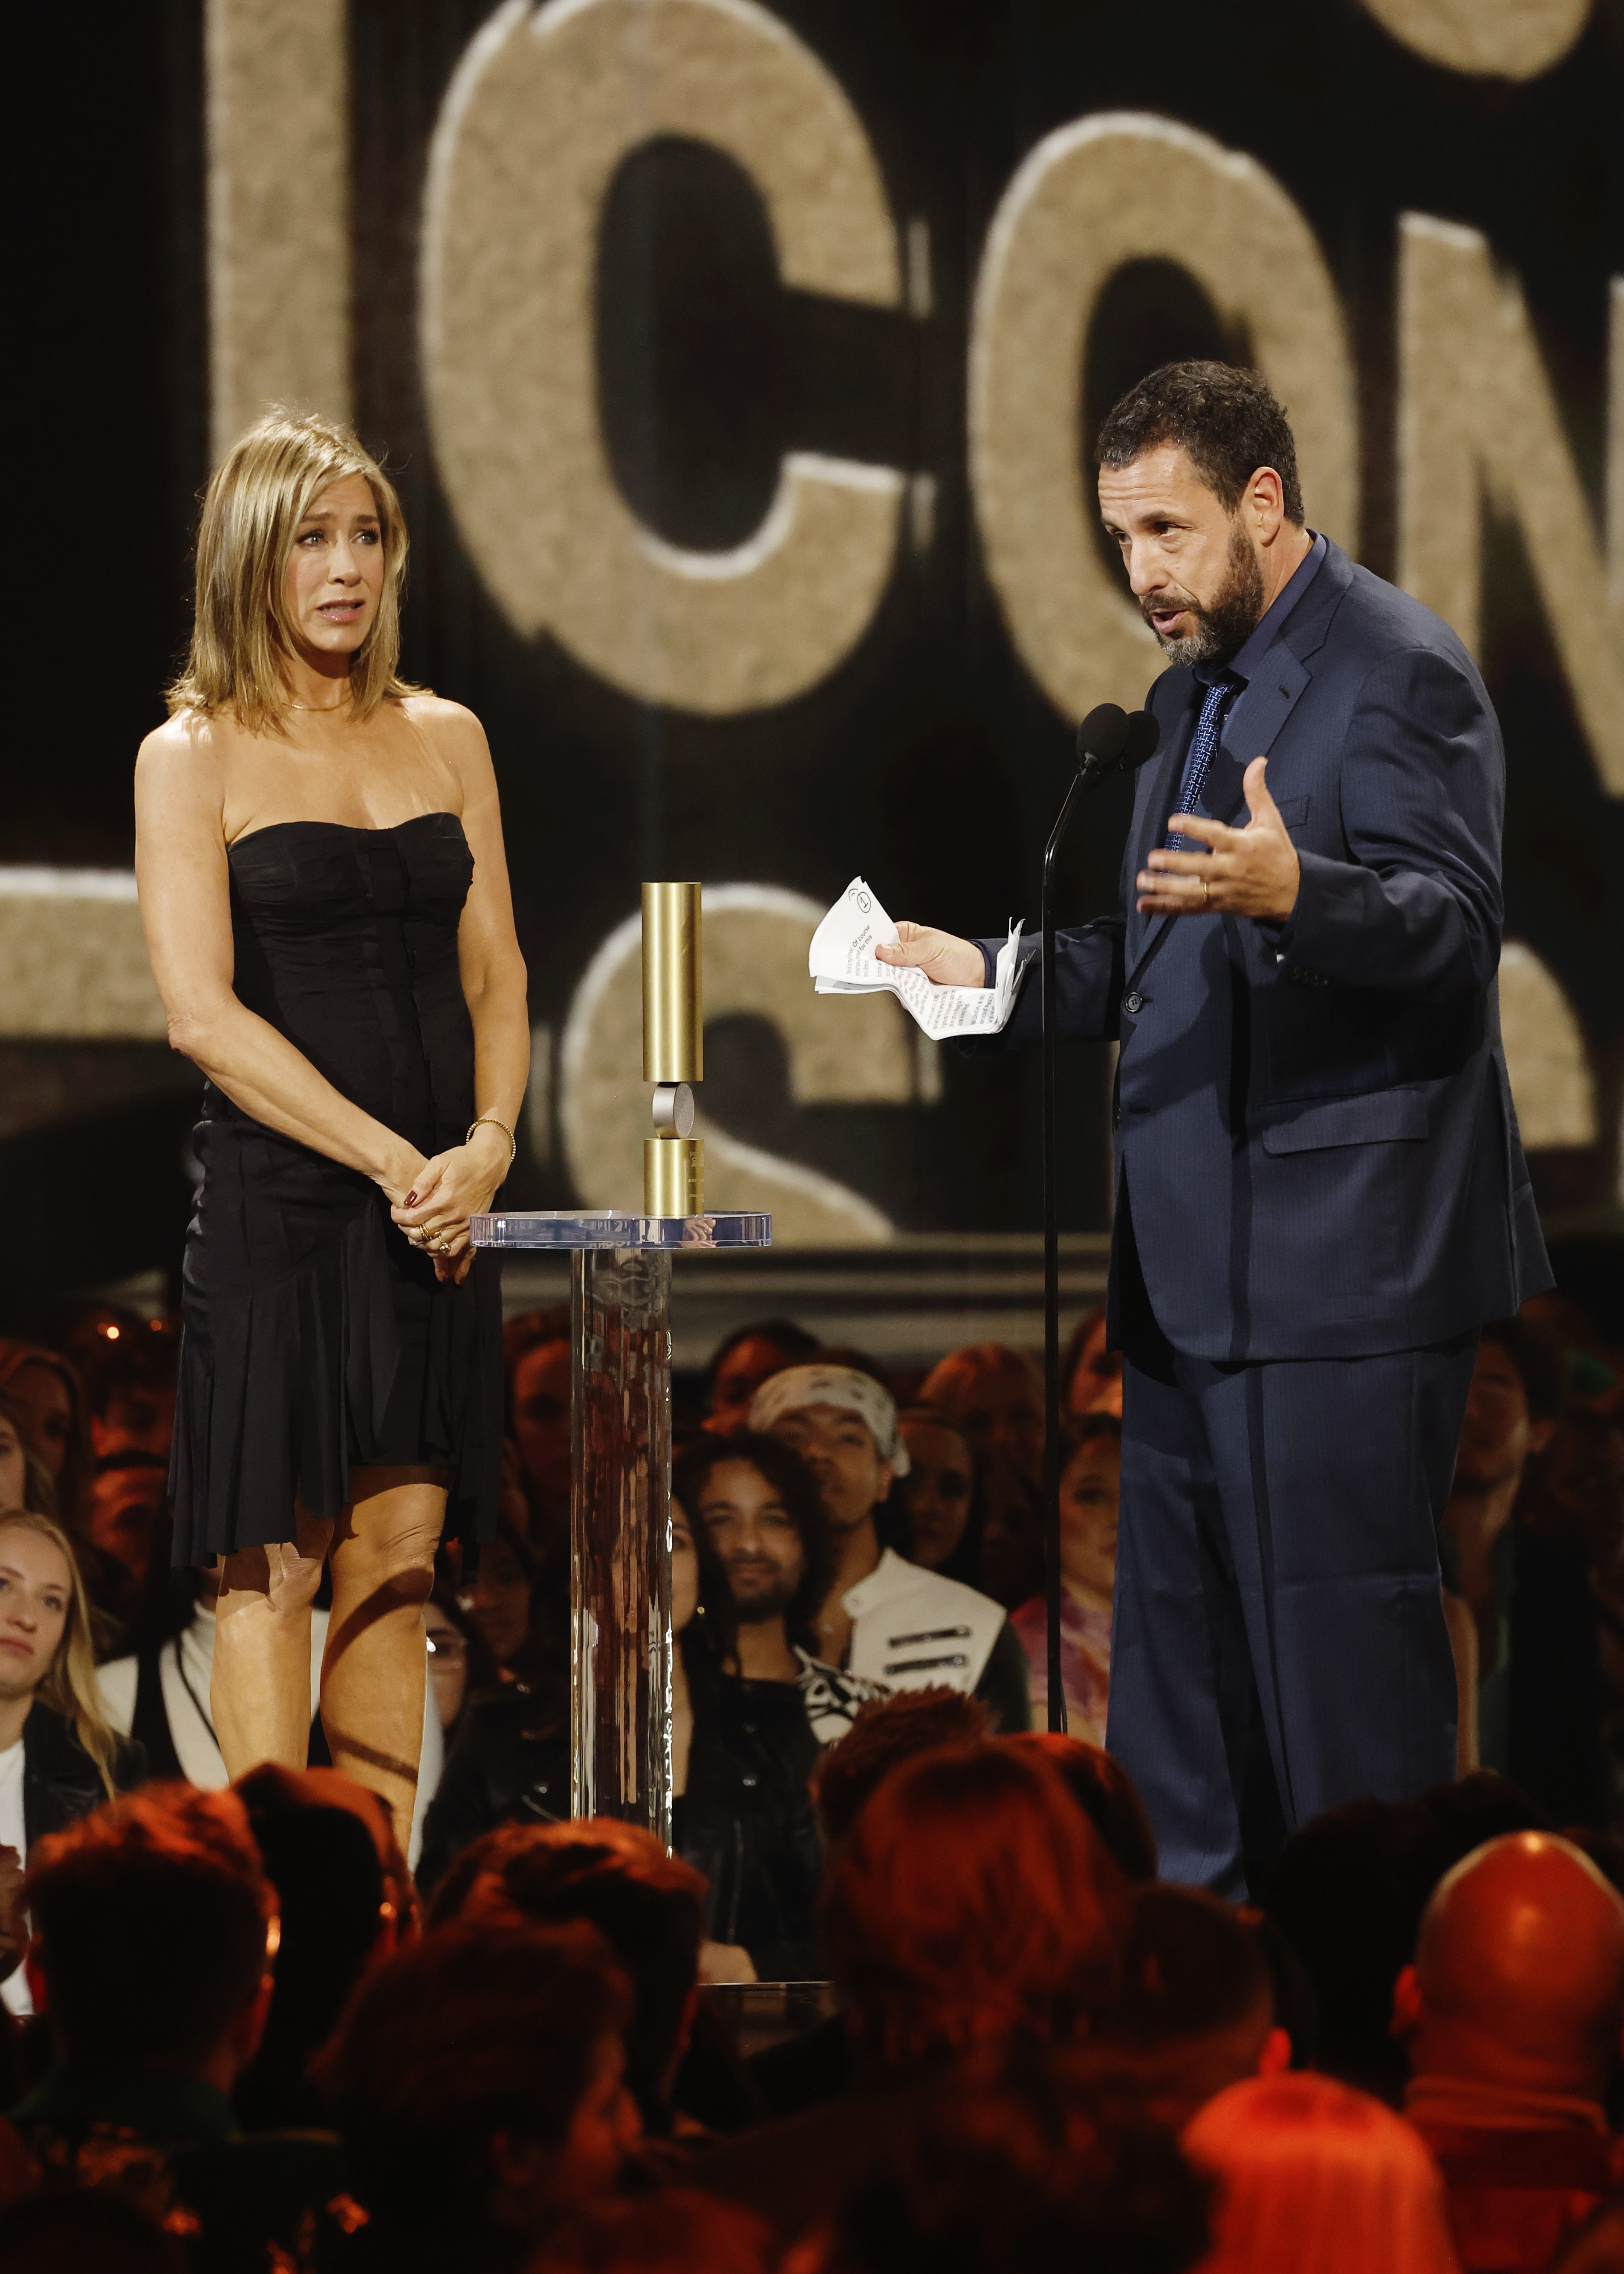 The comedian has faced criticism for his humor in recent weeks, after his PCA speech flopped